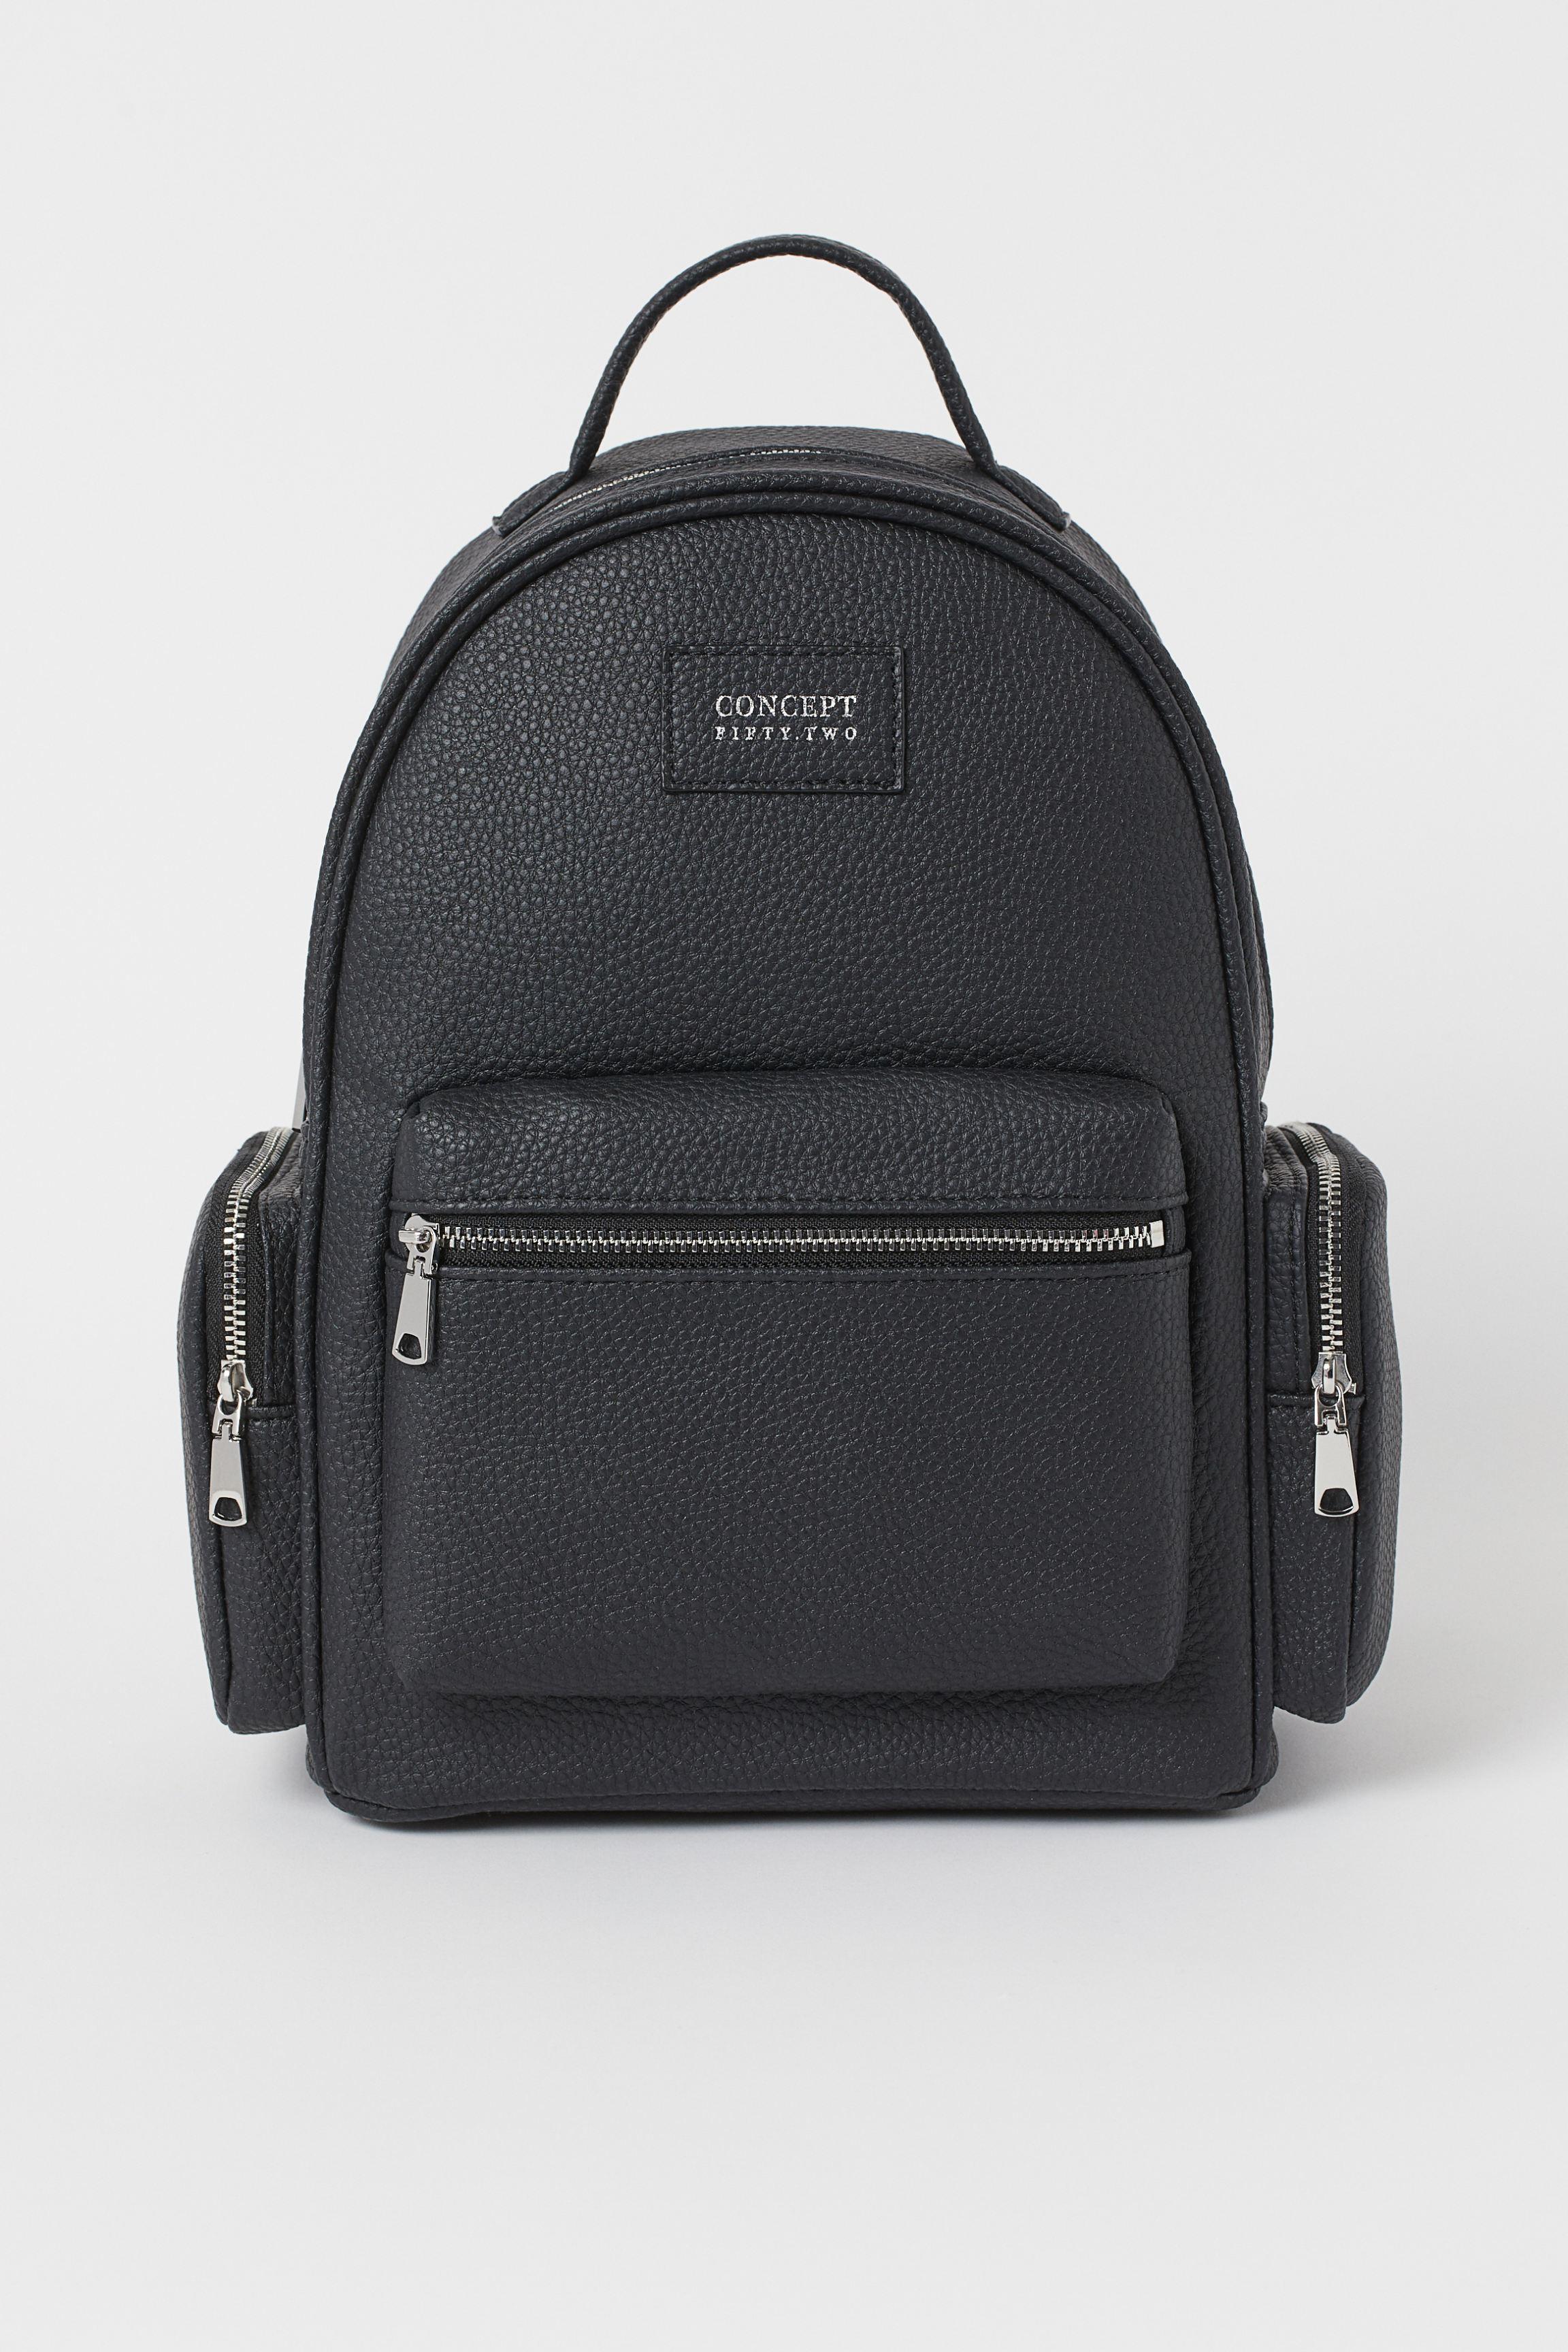 H&M Small Backpack in Black | Lyst